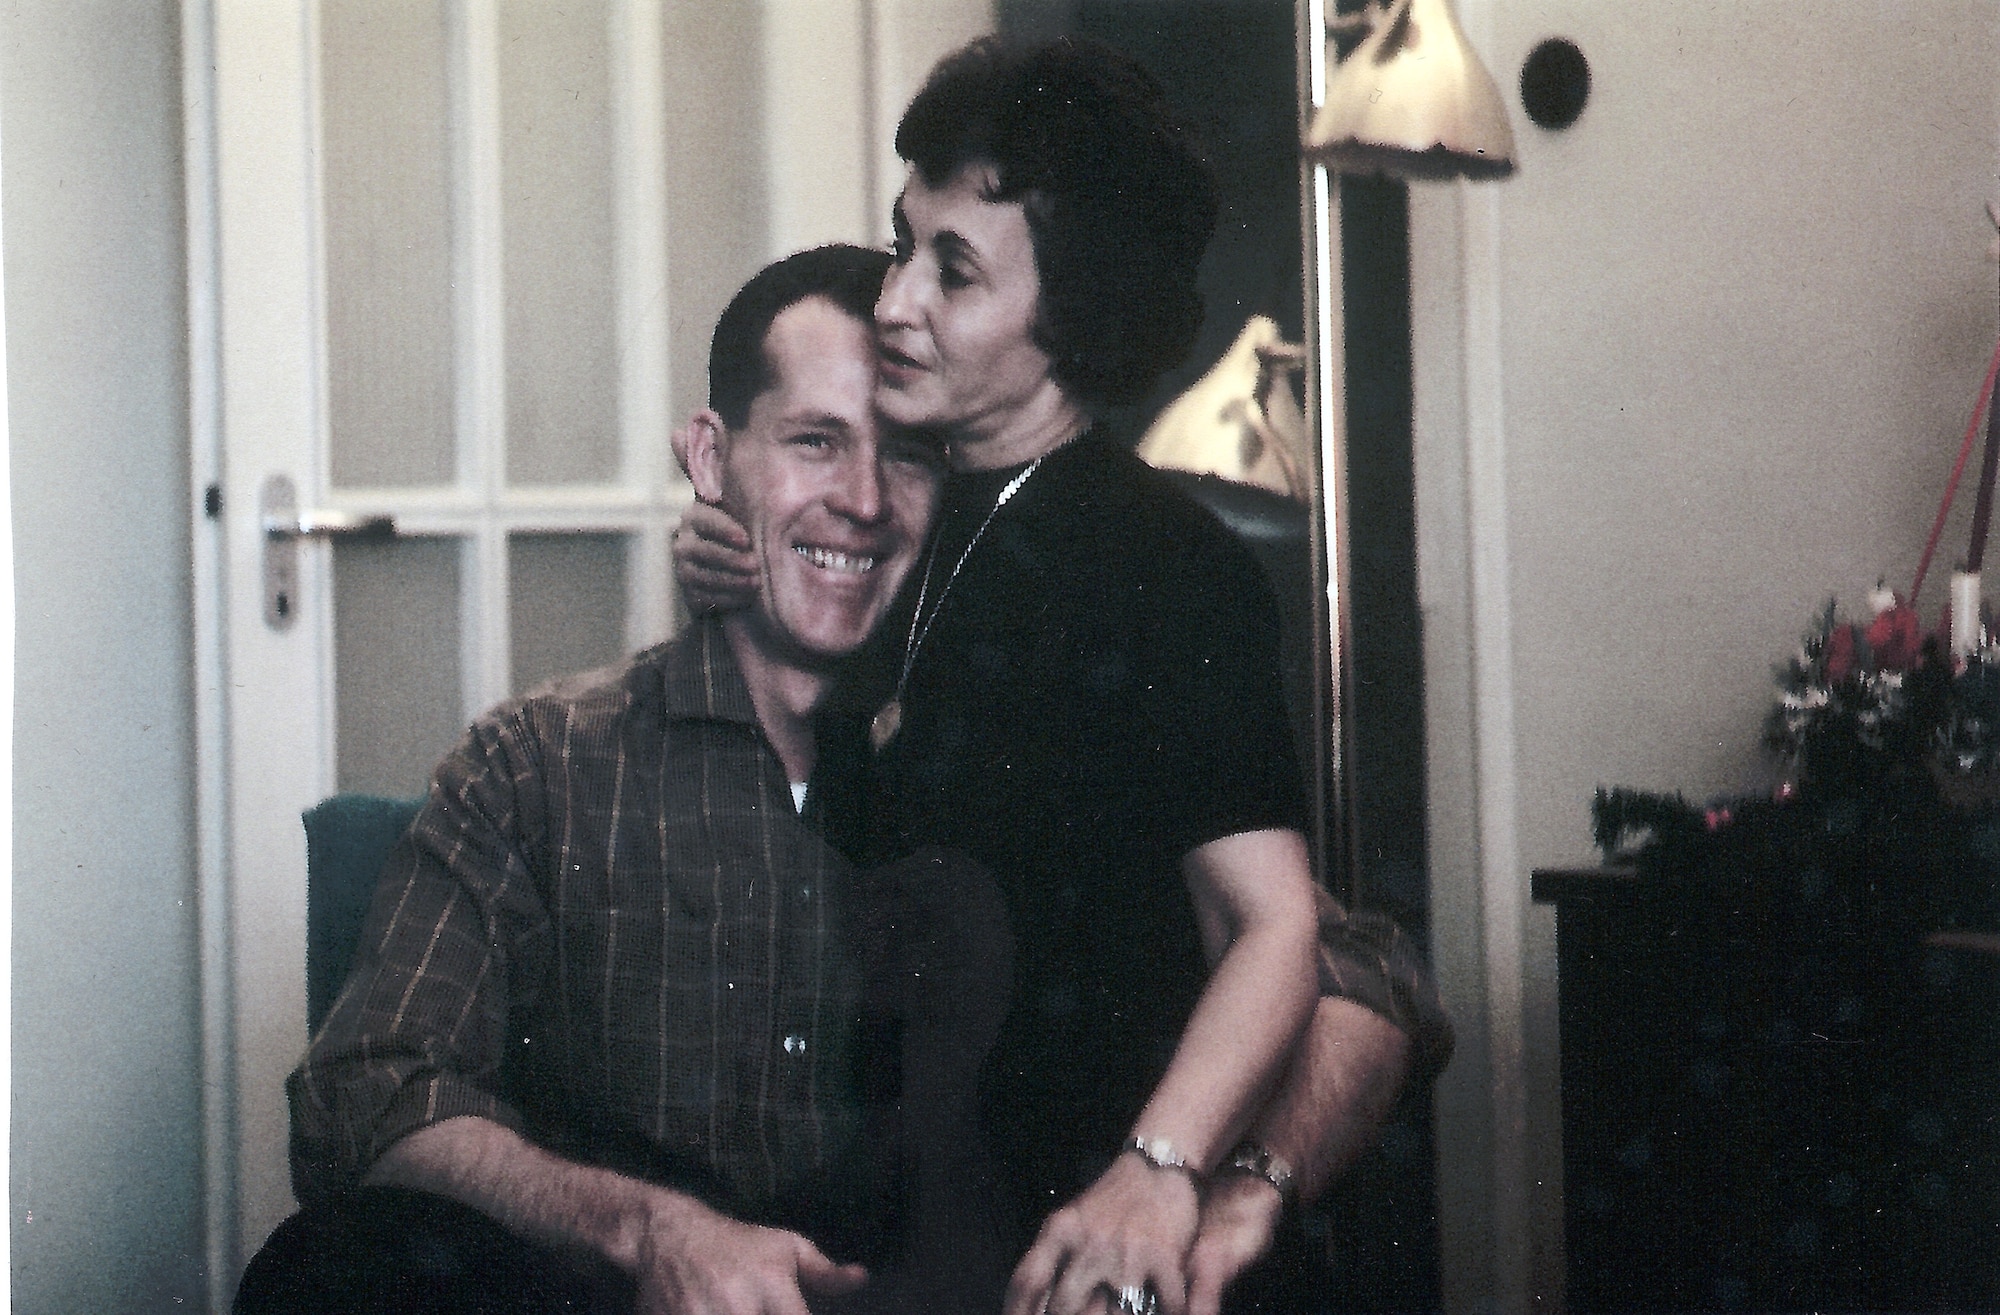 This snapshot of Mary and Maj. Robert F. Woods was taken in the early 1960s while they were stationed at Weisbaden Air Base, Germany. On Nov. 30, 2007, the Air Force announced that Major Woods, along with co-pilot Capt. Johnnie C. Cornelius, were identified and their remains returned to the United States from Vietnam.  On June 26, 1968, Major Woods and Captain Cornelius were flying a visual reconaissance mission over Quang Binh Province, Vietnam, when their O-2A Skymaster aircraft crashed in a remote mountainous area.  Major Woods was buried with full military honors April 9, 2008, at Arlington National Cemetery nearly 40 years after he disappeared in the crash. (Photo courtesy of the Woods family)